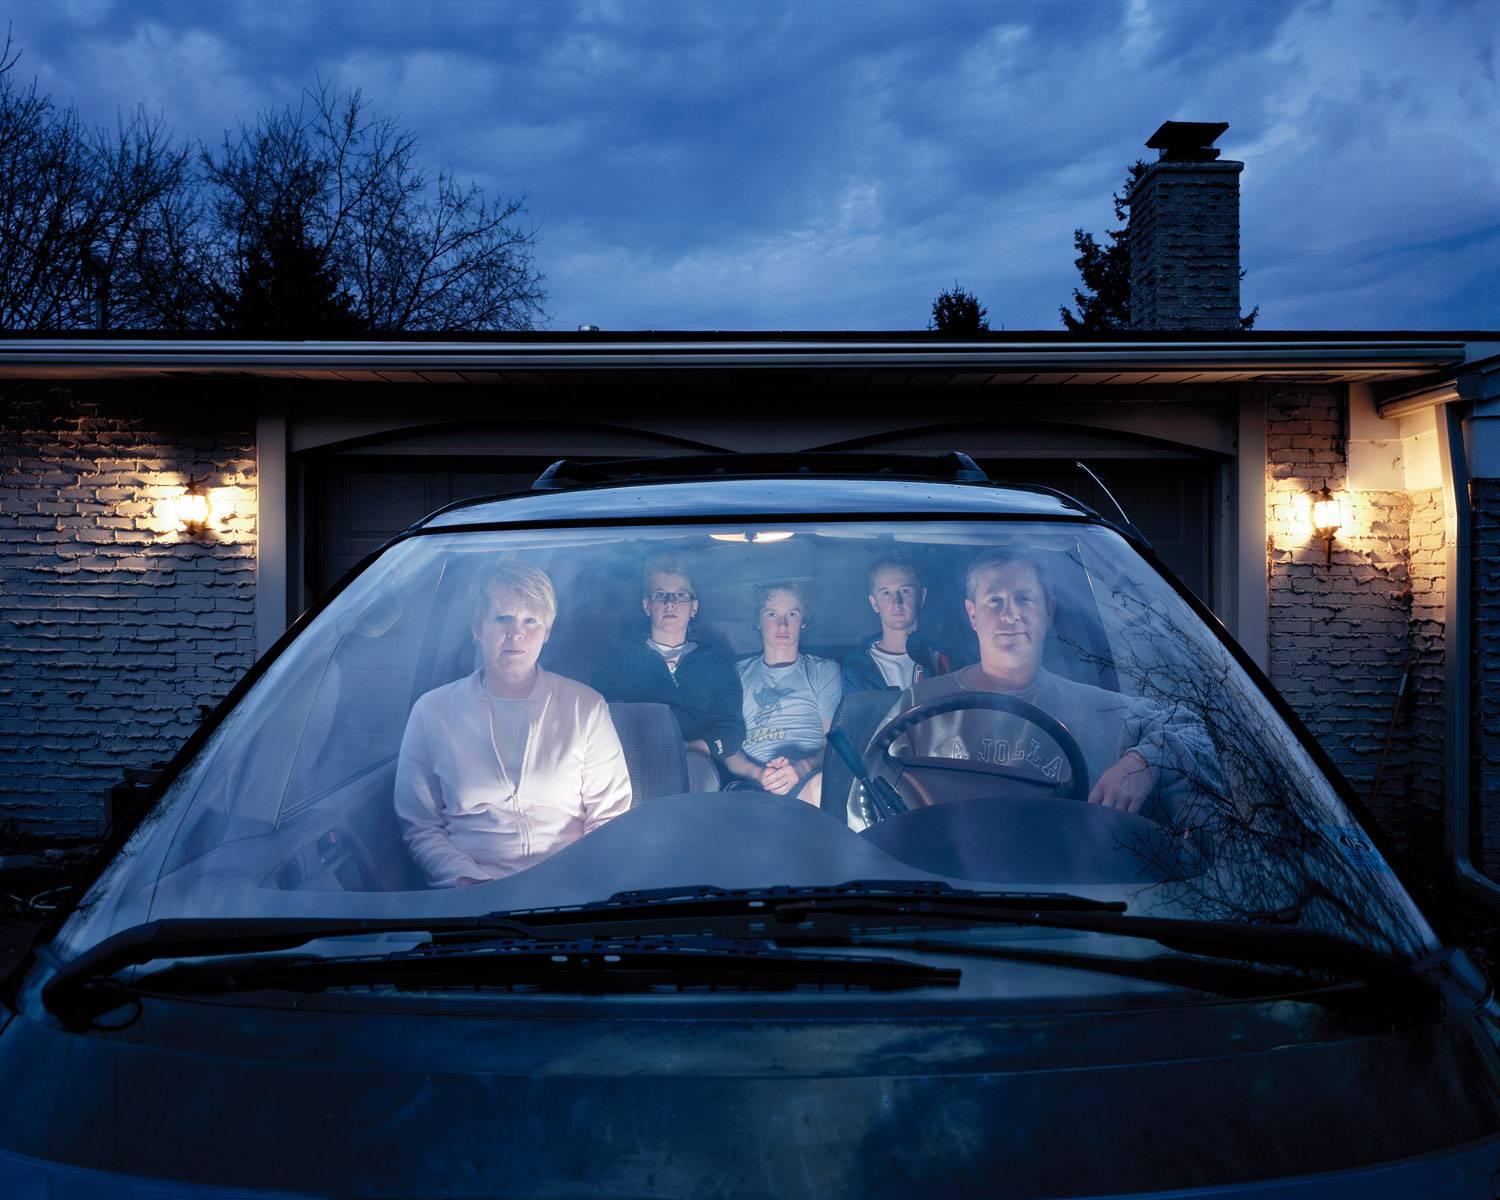 Julie Mack Color Photograph - Self-Portrait with Family in SUV, Michigan